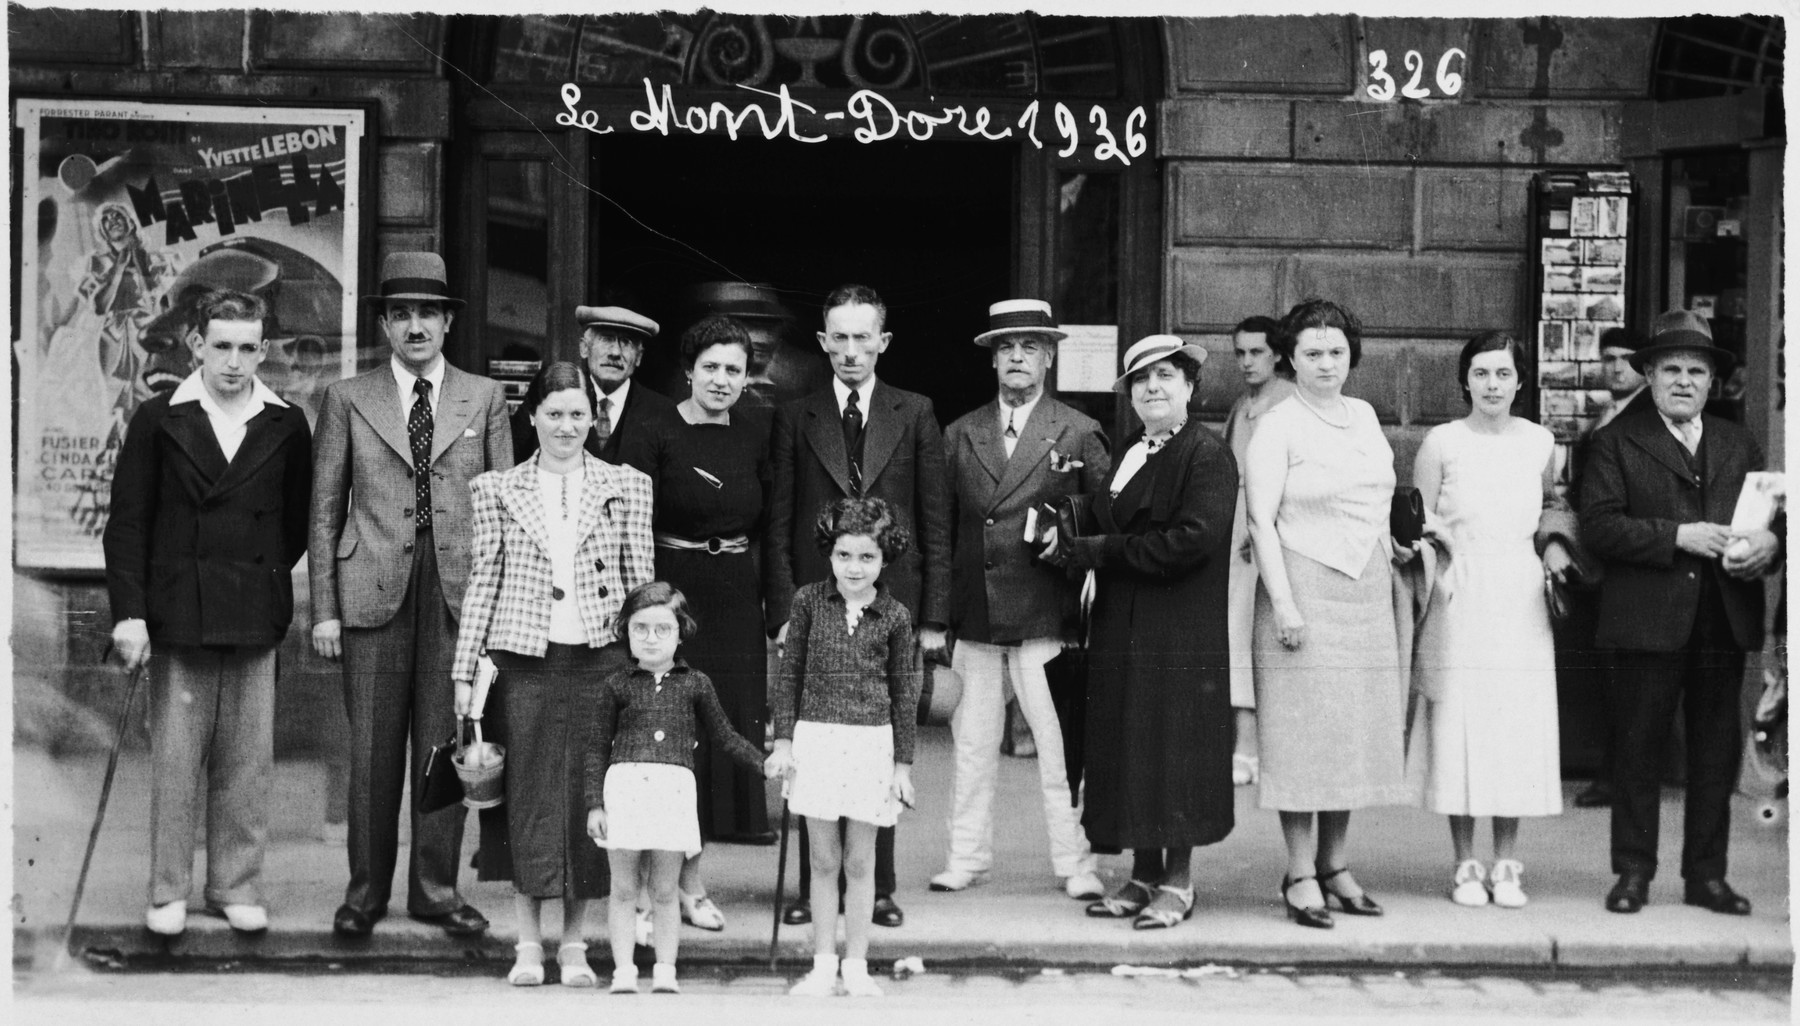 A Jewish family visits Mont-Dore where they pose with a large group in front of a movie poster.

Among those pictured are the Apfel family -- Samuel (second from the left), Fanny, Paulette and Ruth.